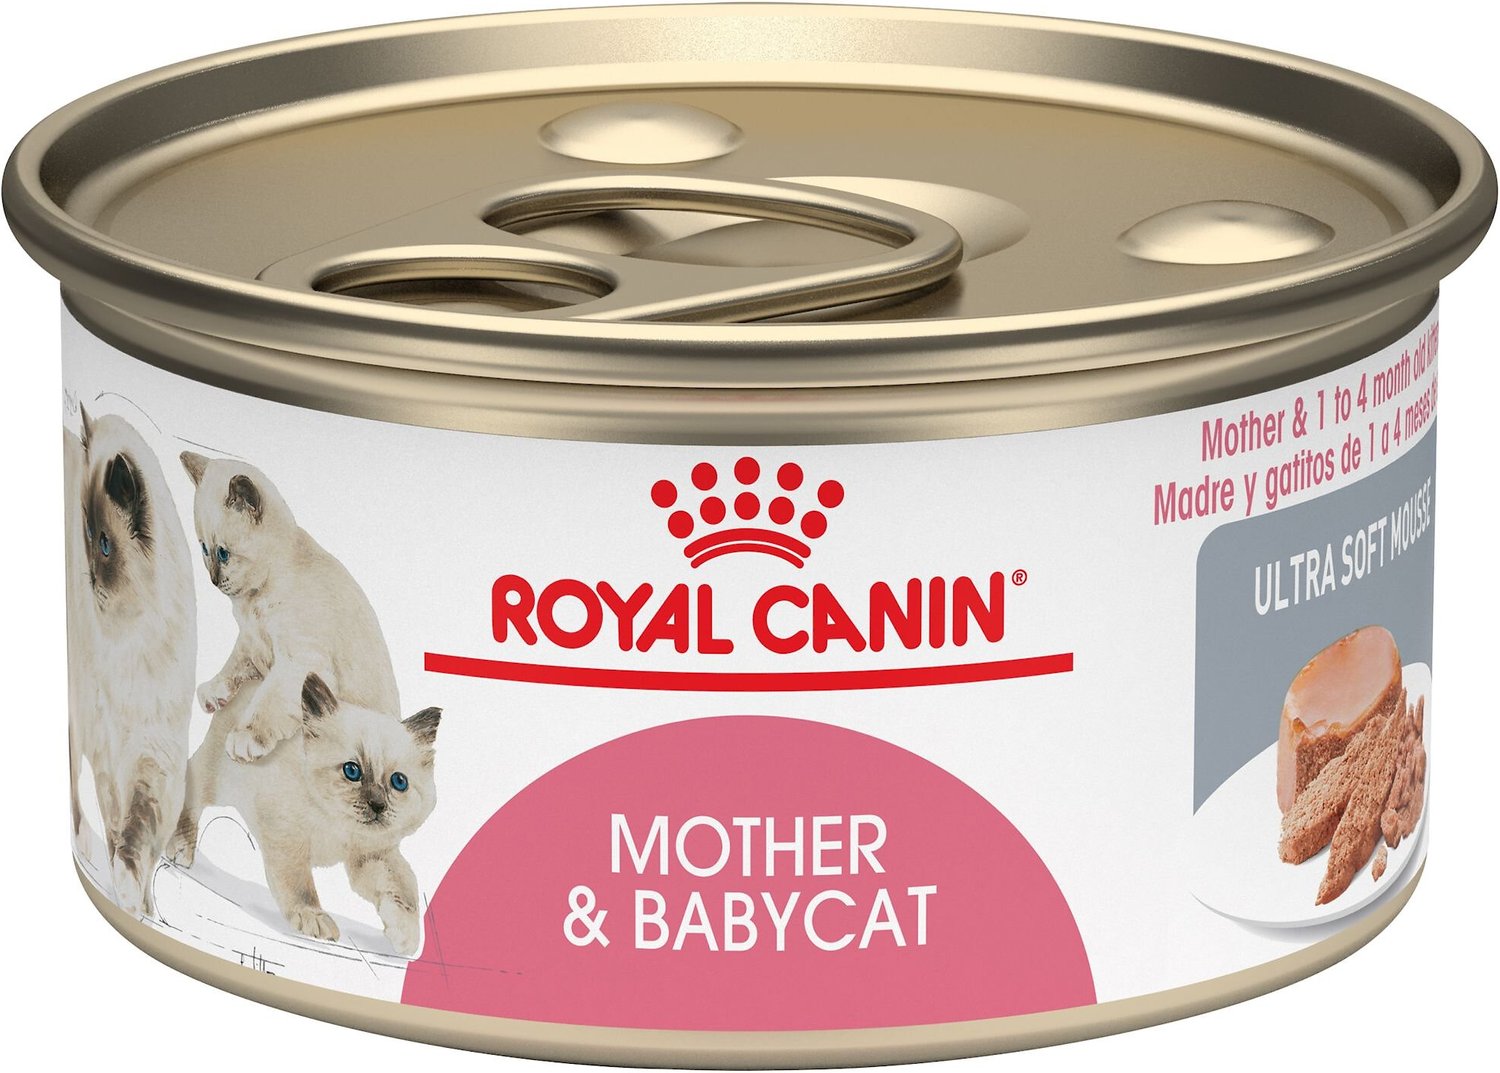 ROYAL CANIN Mother & Babycat Ultra-Soft Mousse in Sauce ...